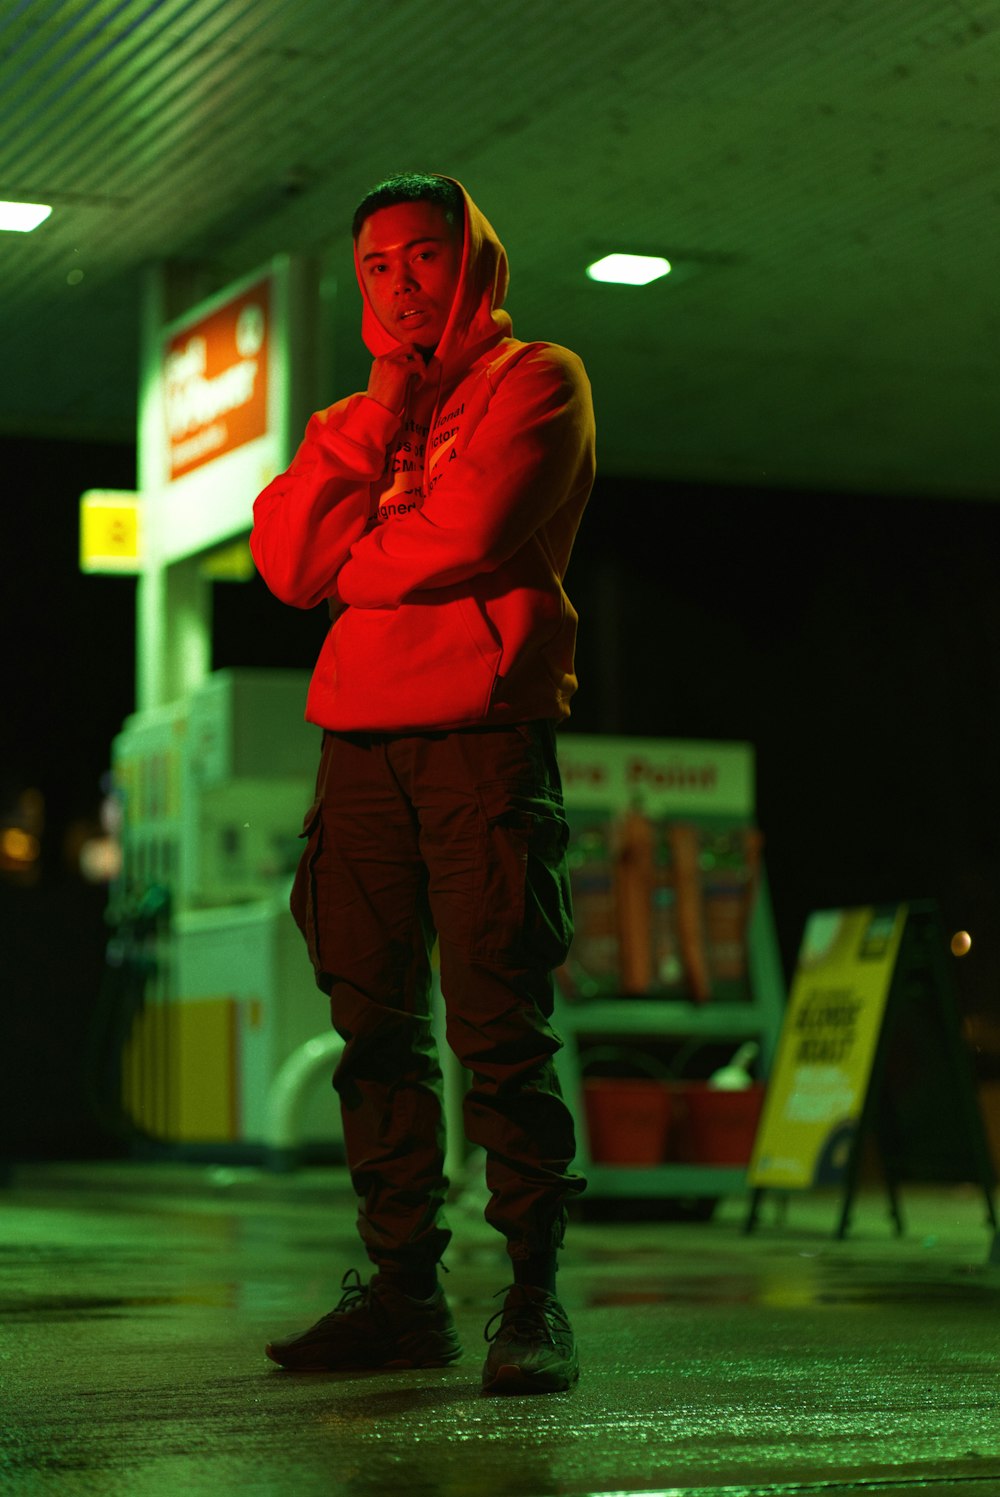 a man in a red jacket standing in a parking lot